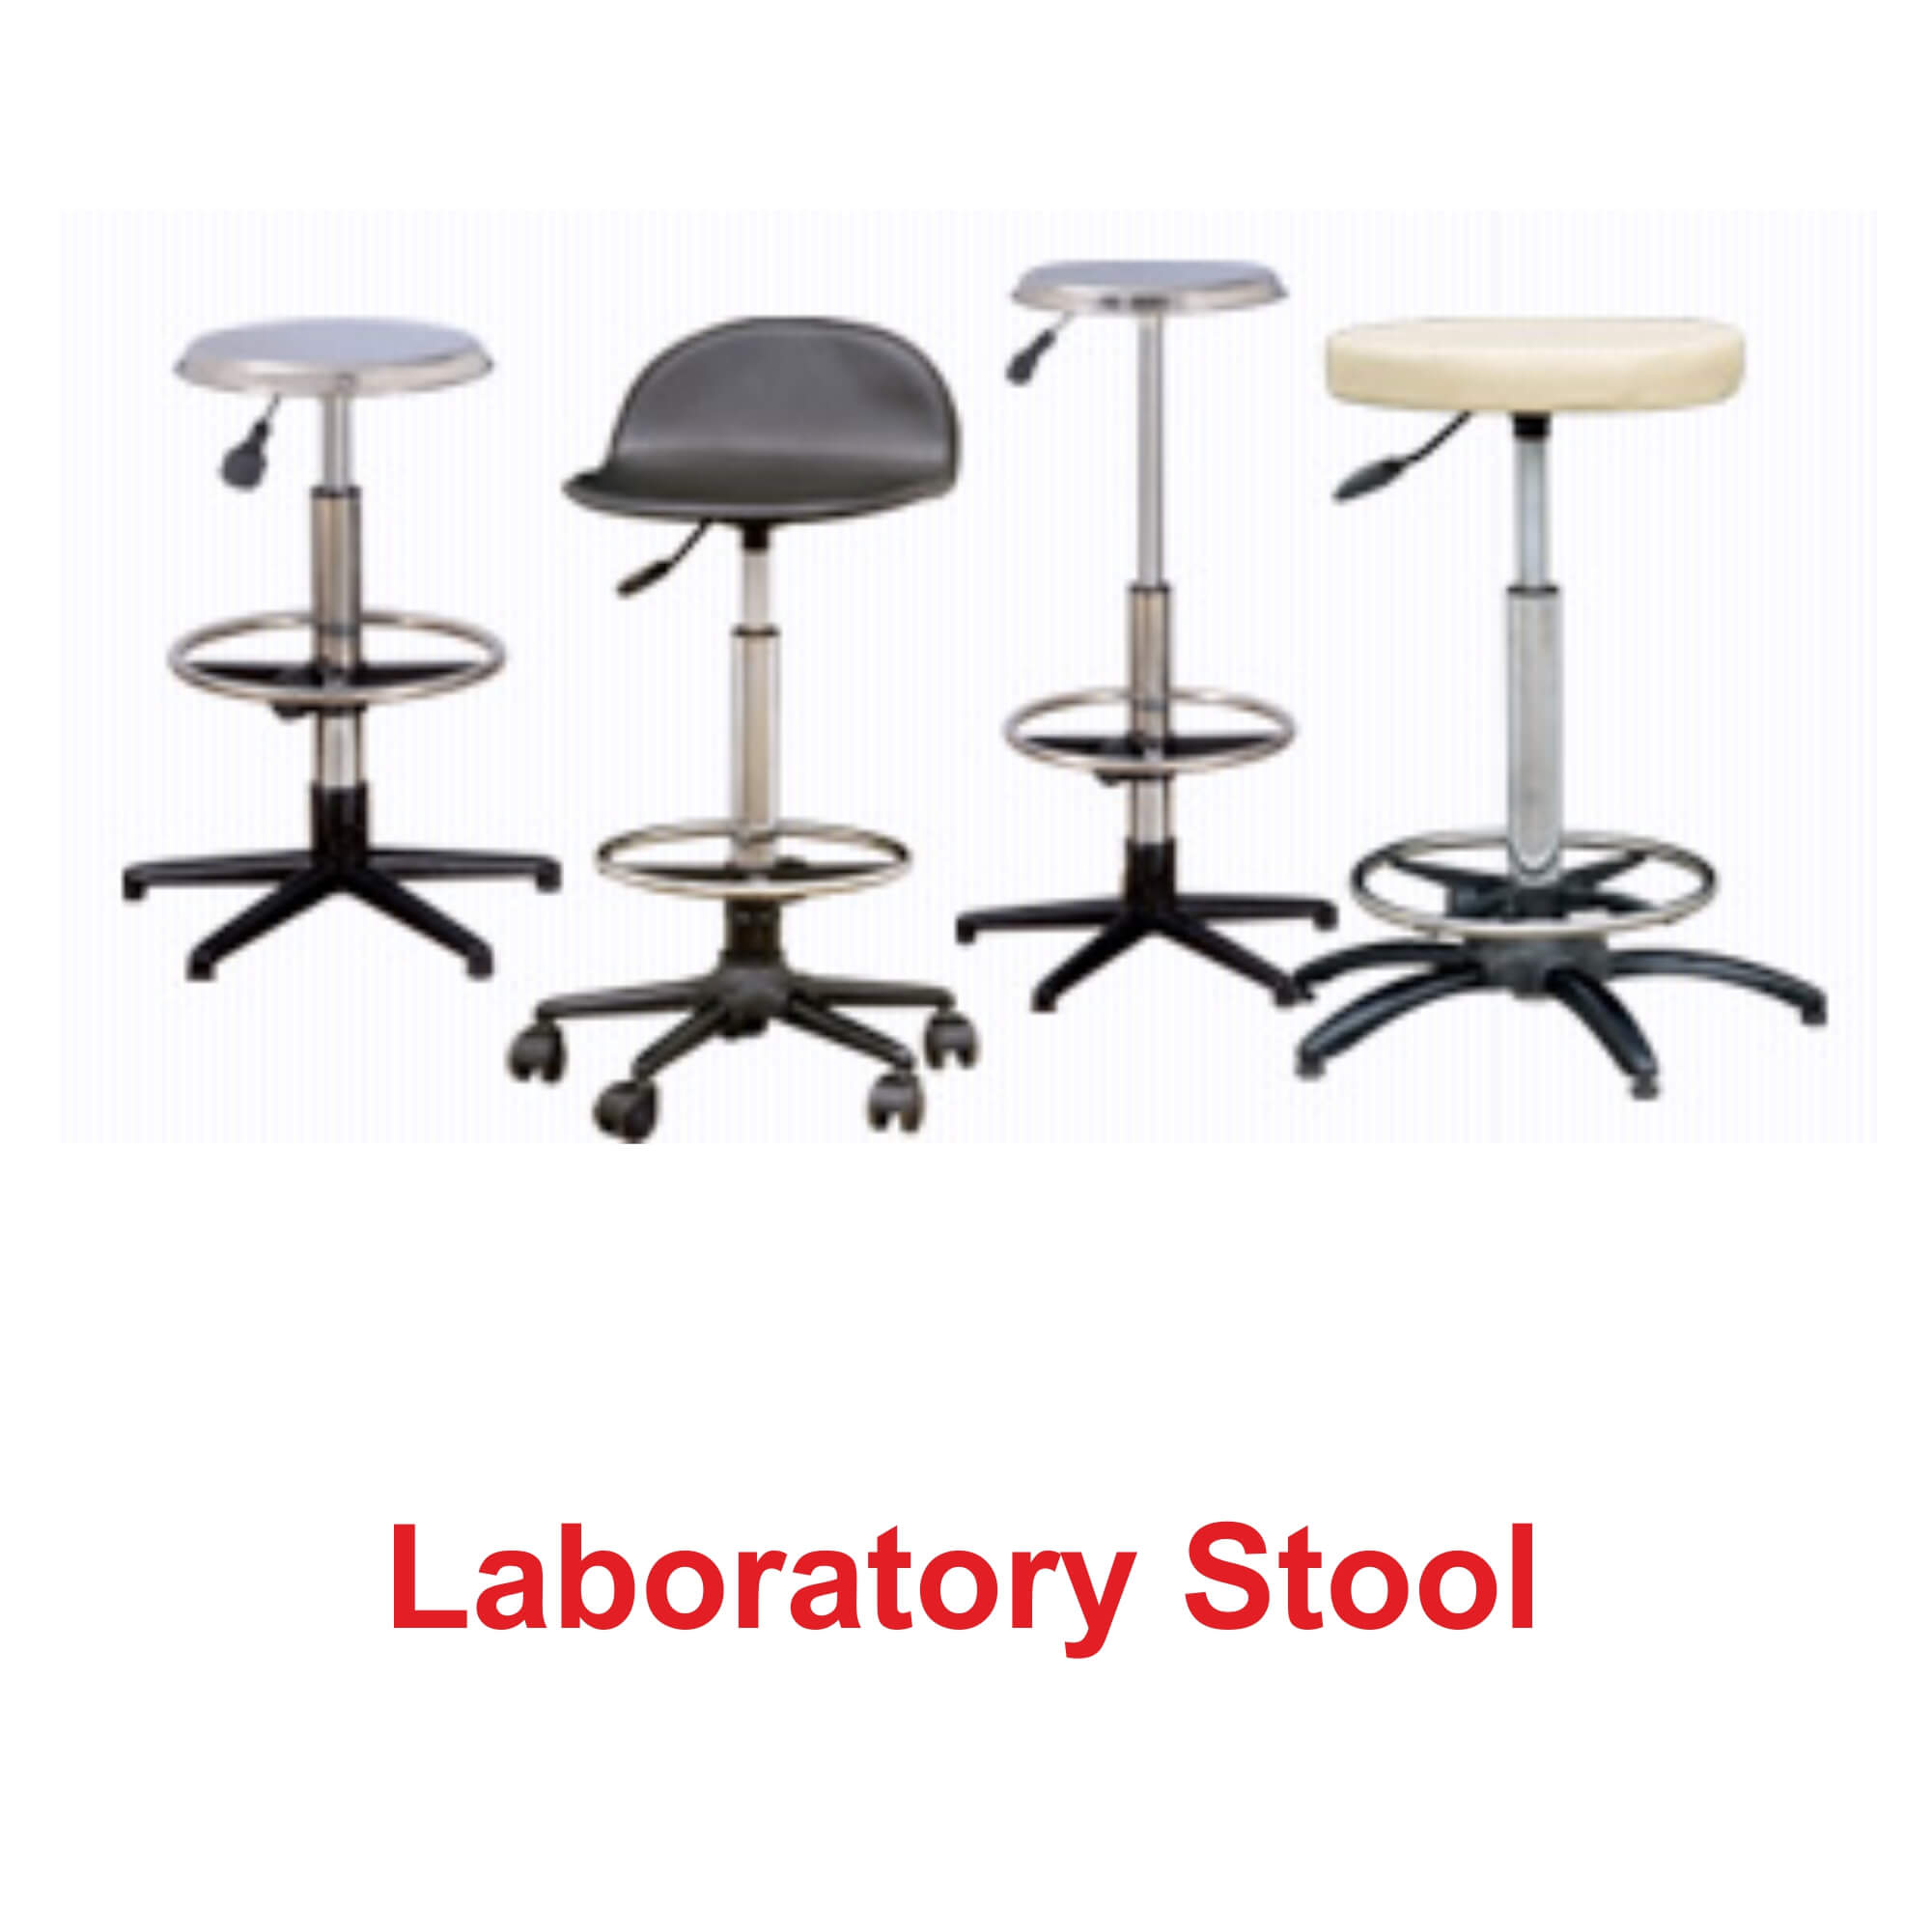 Laboratory Stool Manufacturer in India